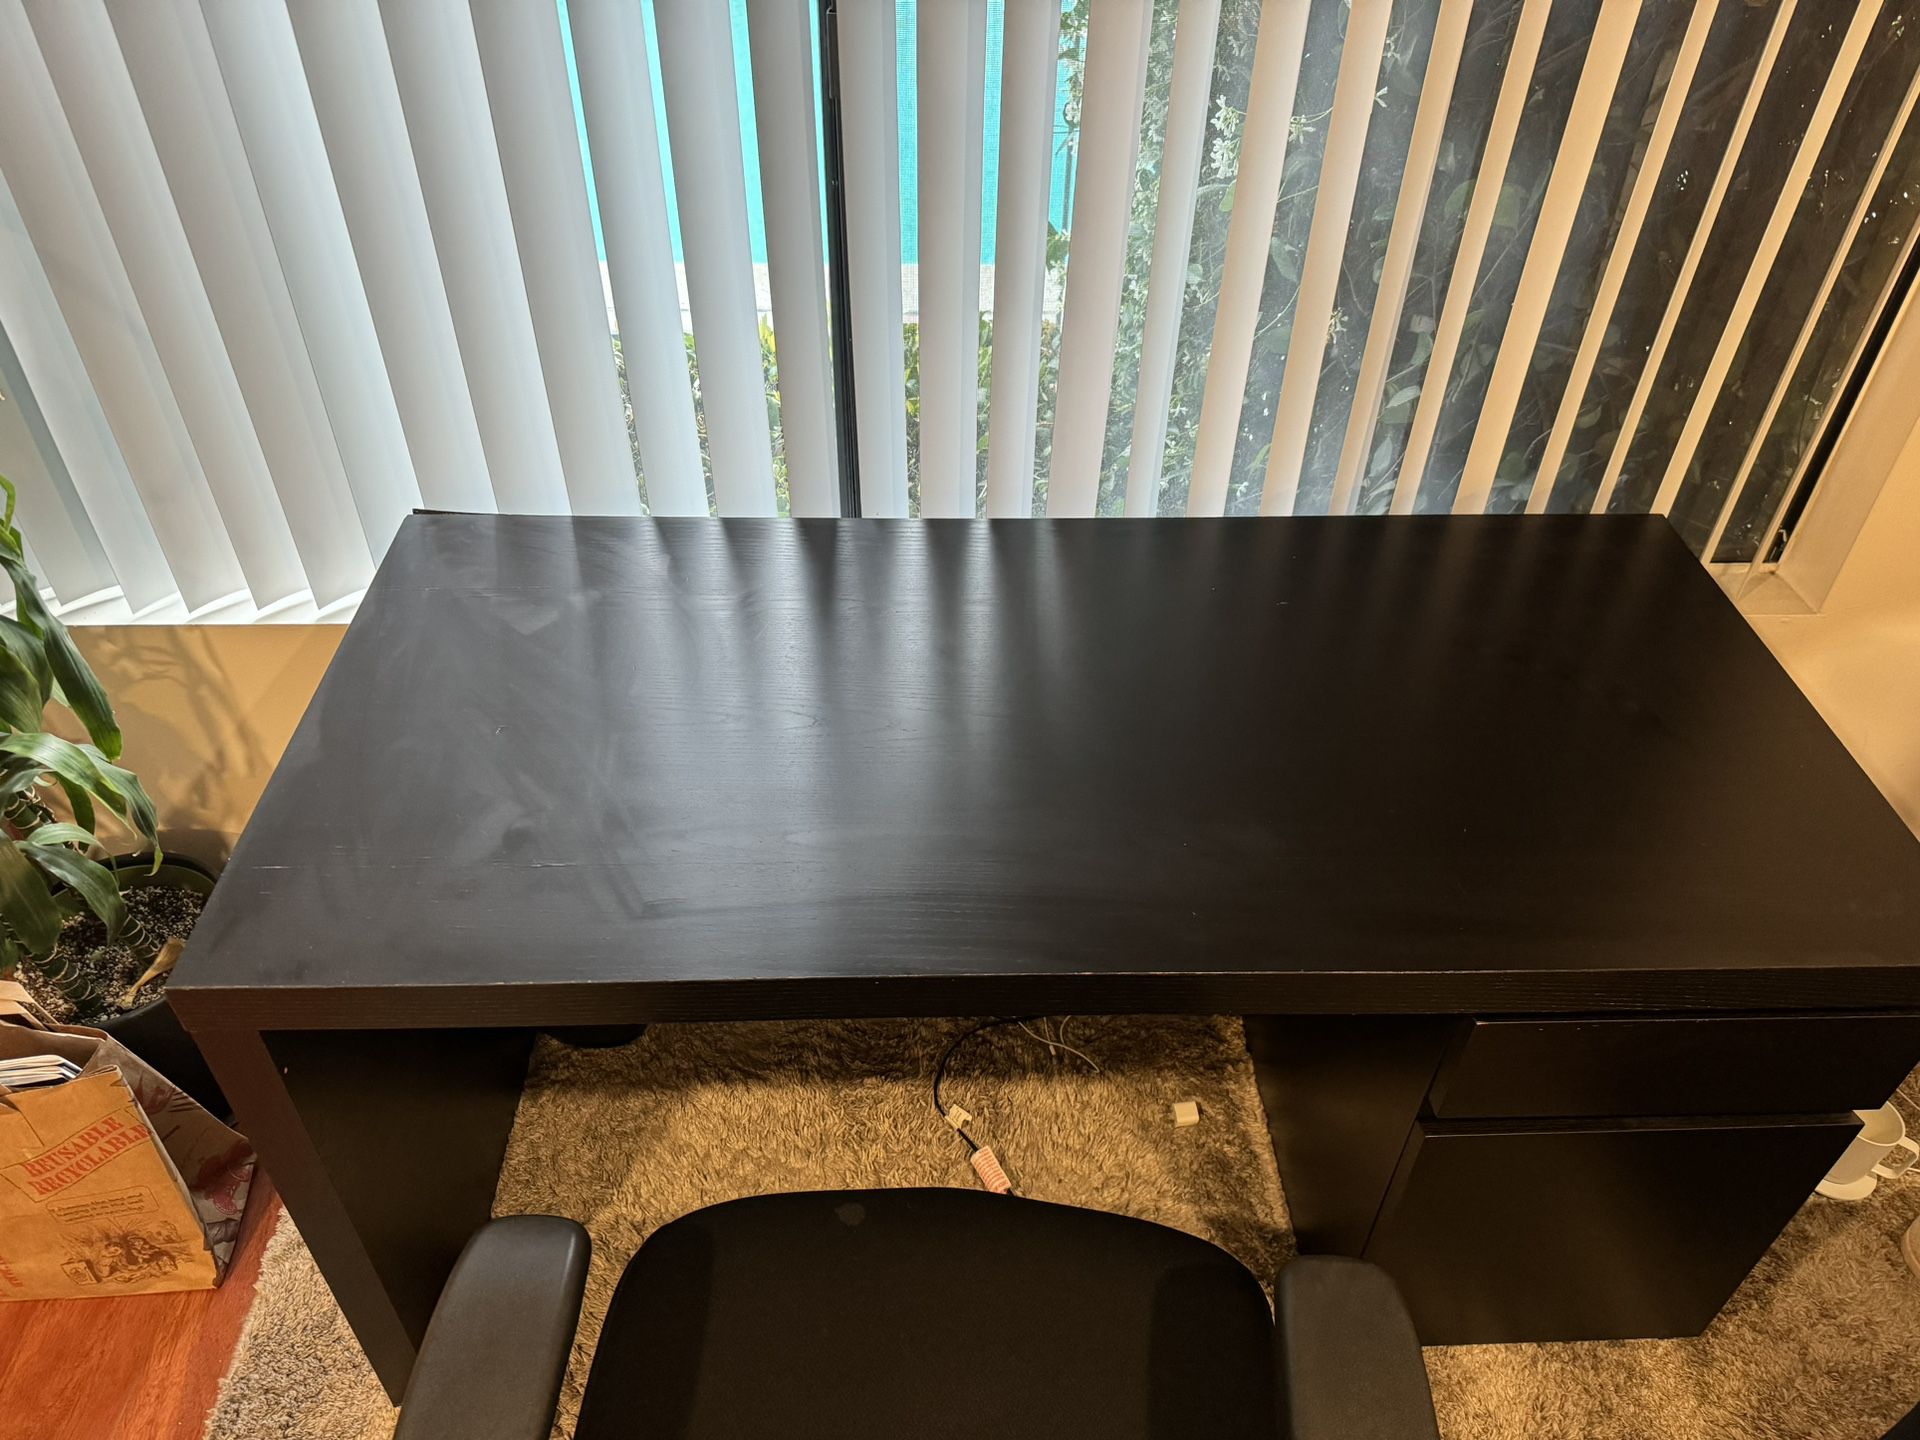 For Sale: Black Wood IKEA Desk with Two Drawers - $25